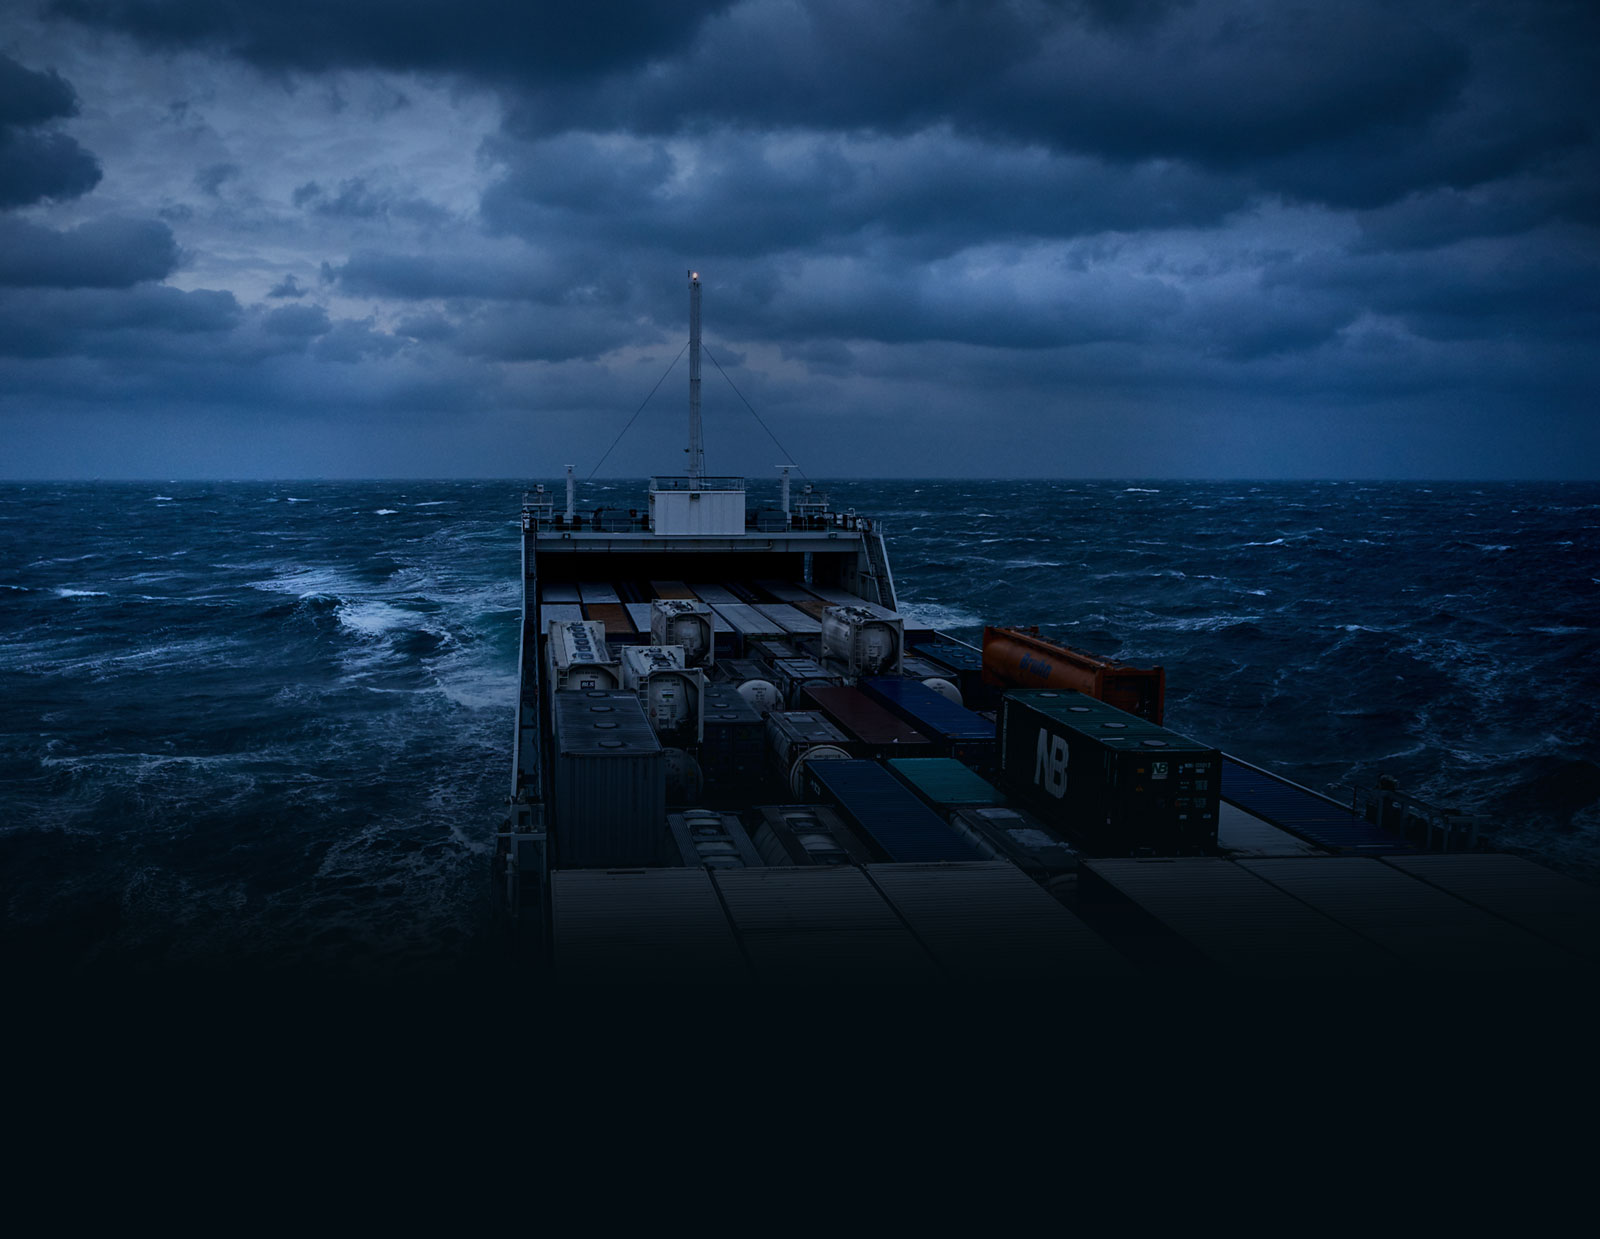 A close-up picture of a lonely cargo vessel out on a dark, dramatic sea in the middle of the night. No marine flares or distress signals are visible.